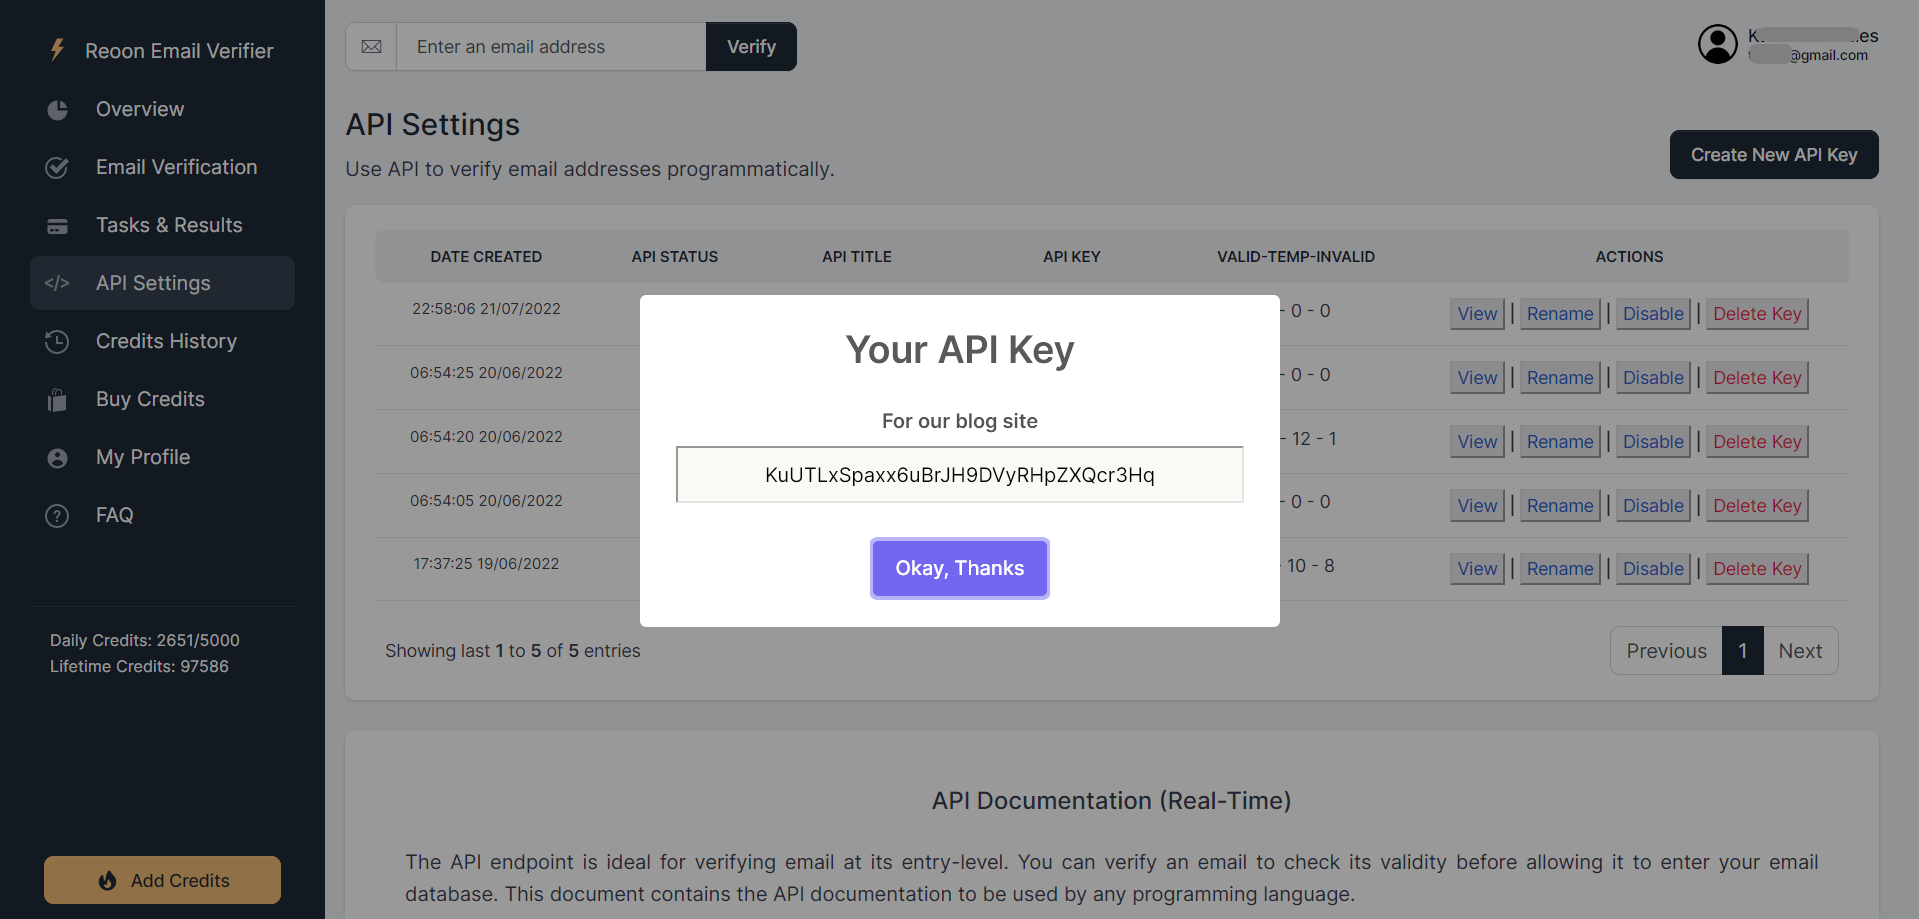 One generated API key for programmatic use of the service and 3rd party integration. Multiple API keys can be created and managed in this section.